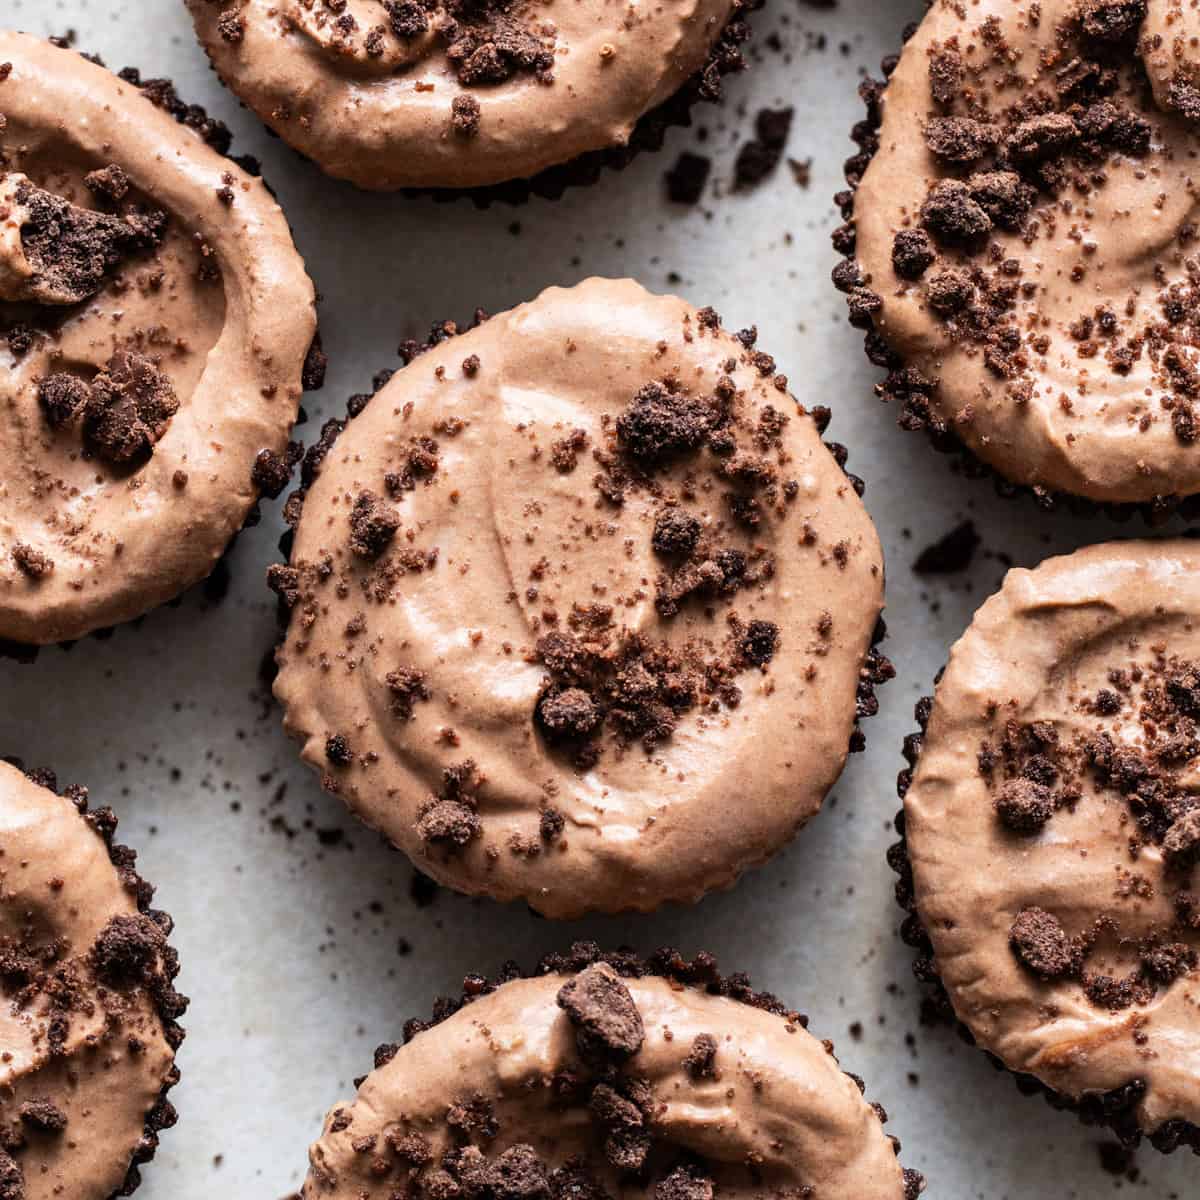 Chocolate cupcakes with chocolate frosting and chocolate chips.